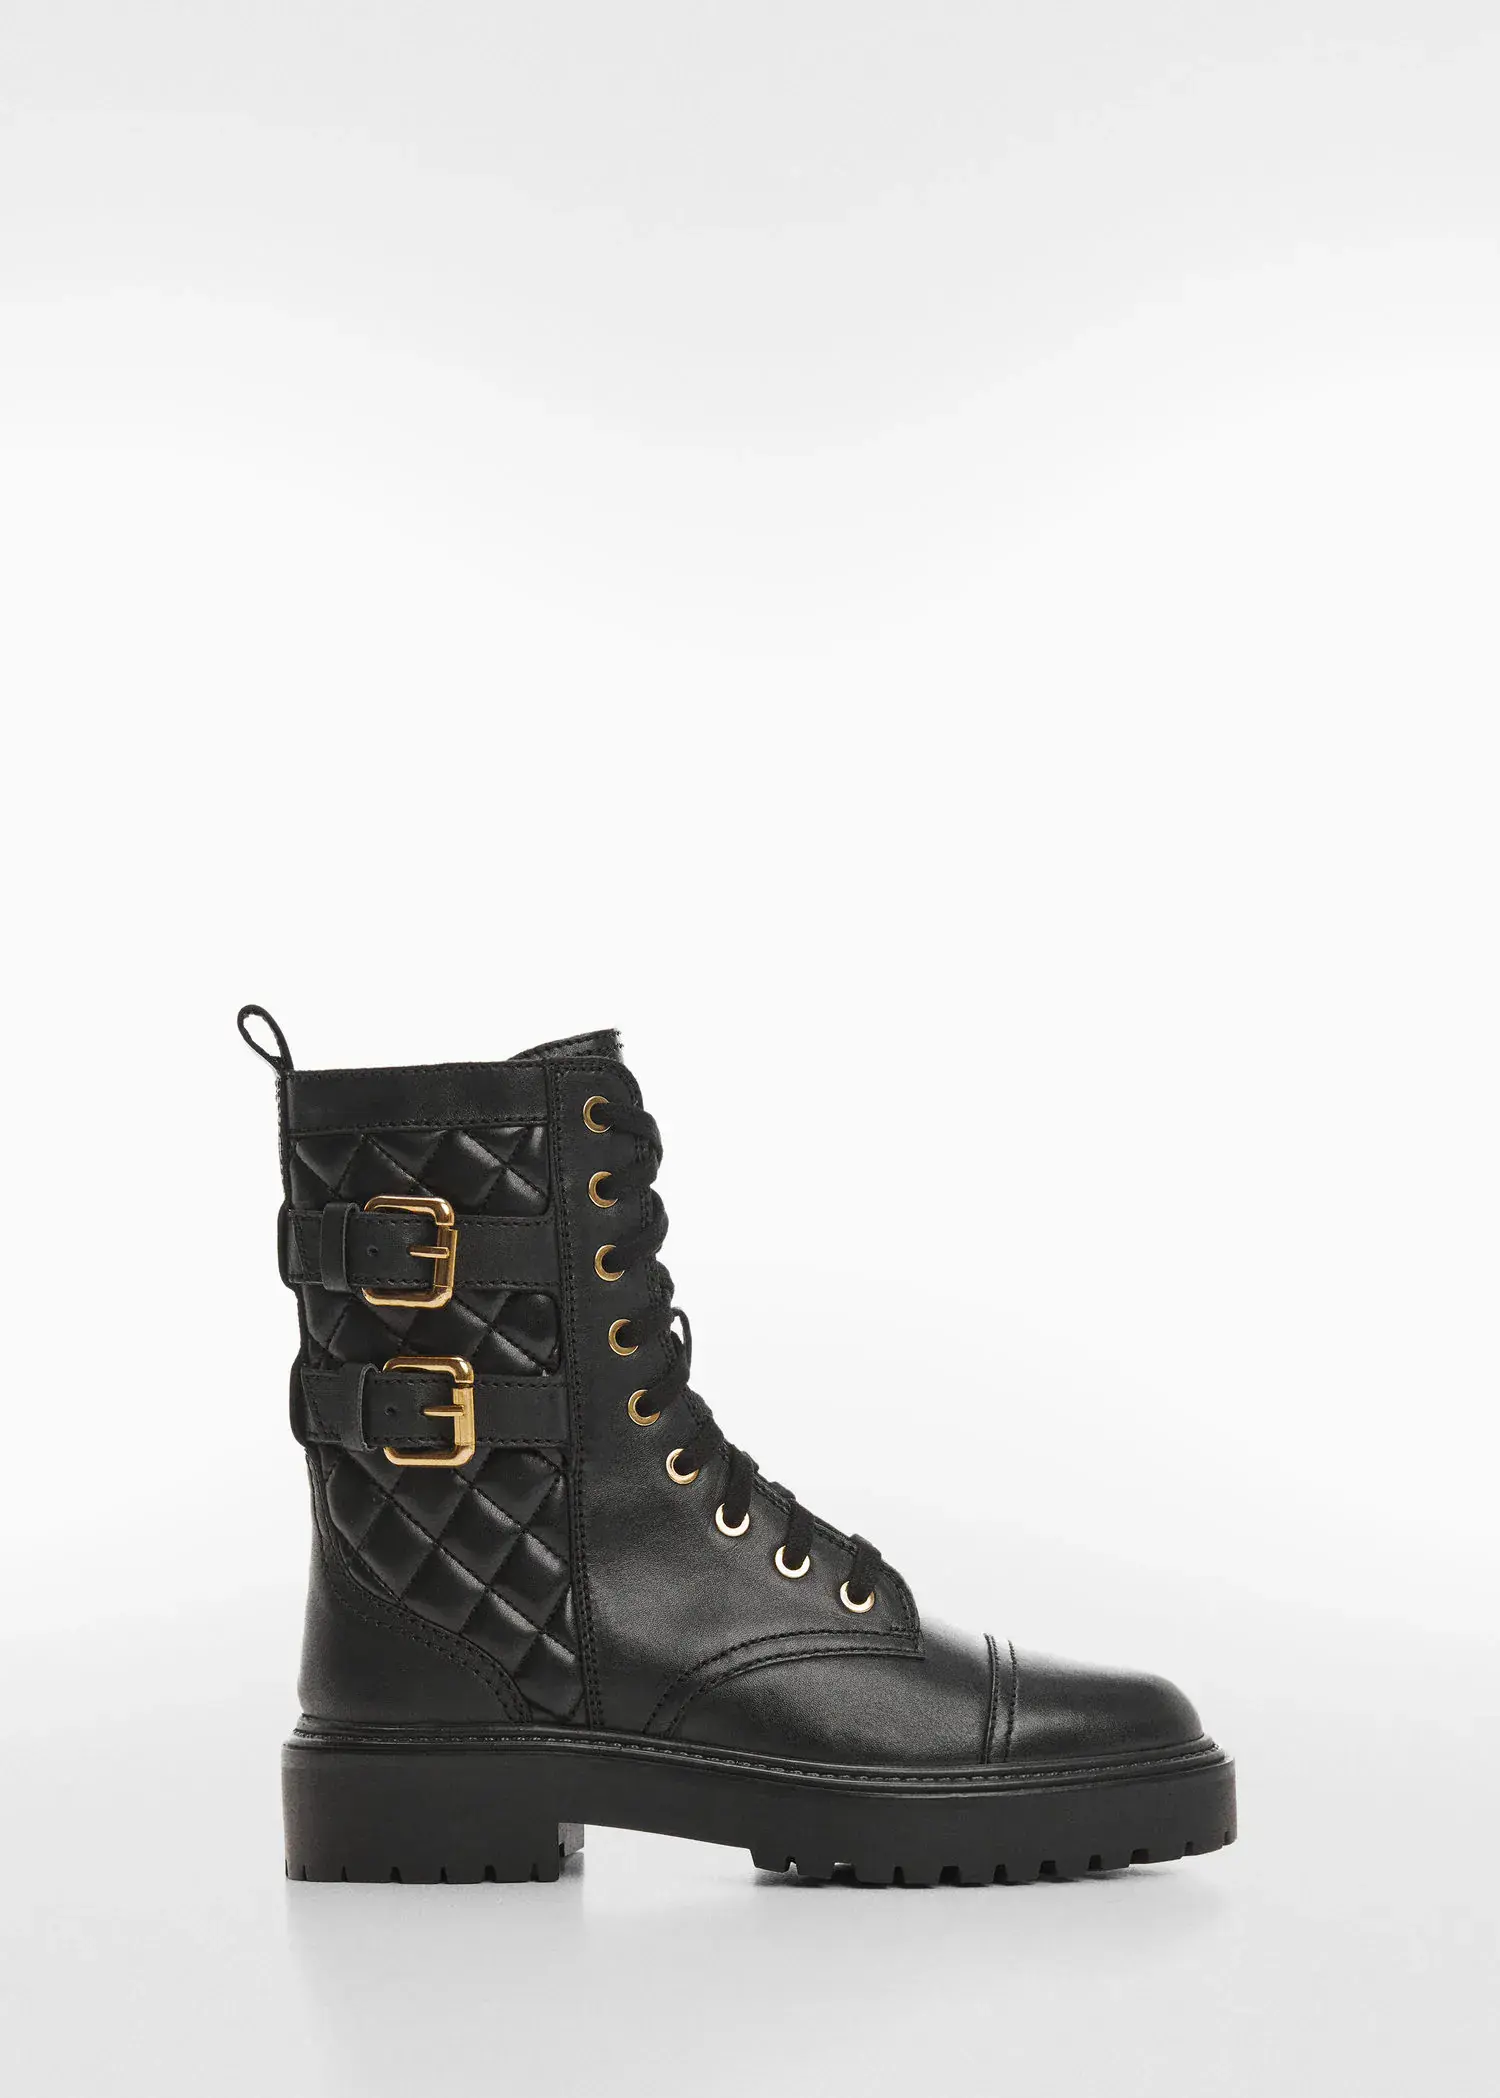 Mango Military leather ankle boots. 1